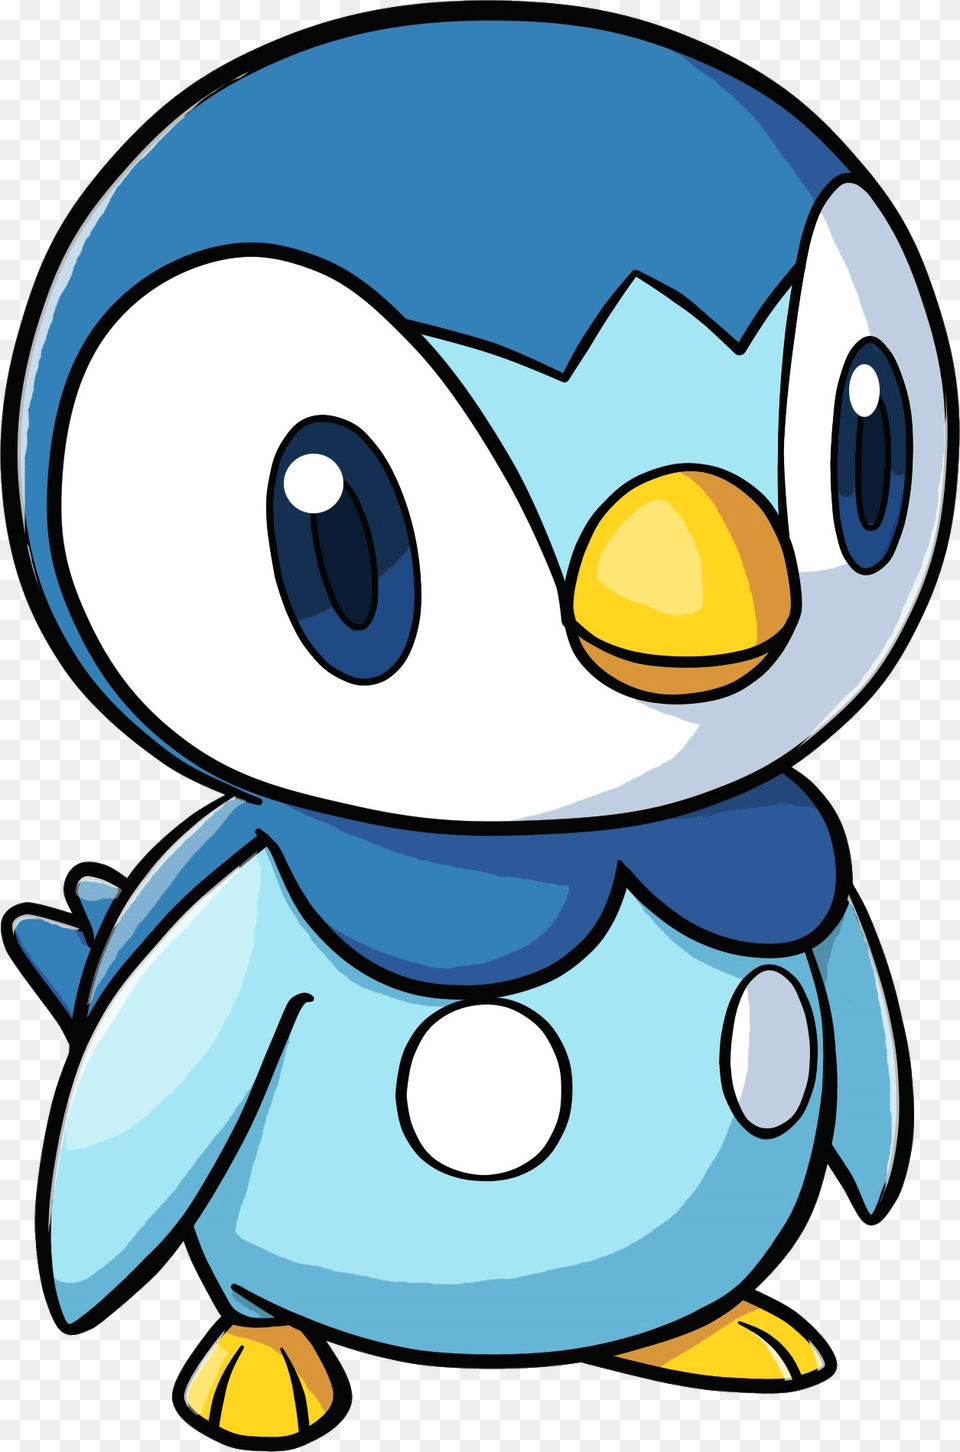 Piplup Pokemon Transparent, Plush, Toy, Baby, Person Png